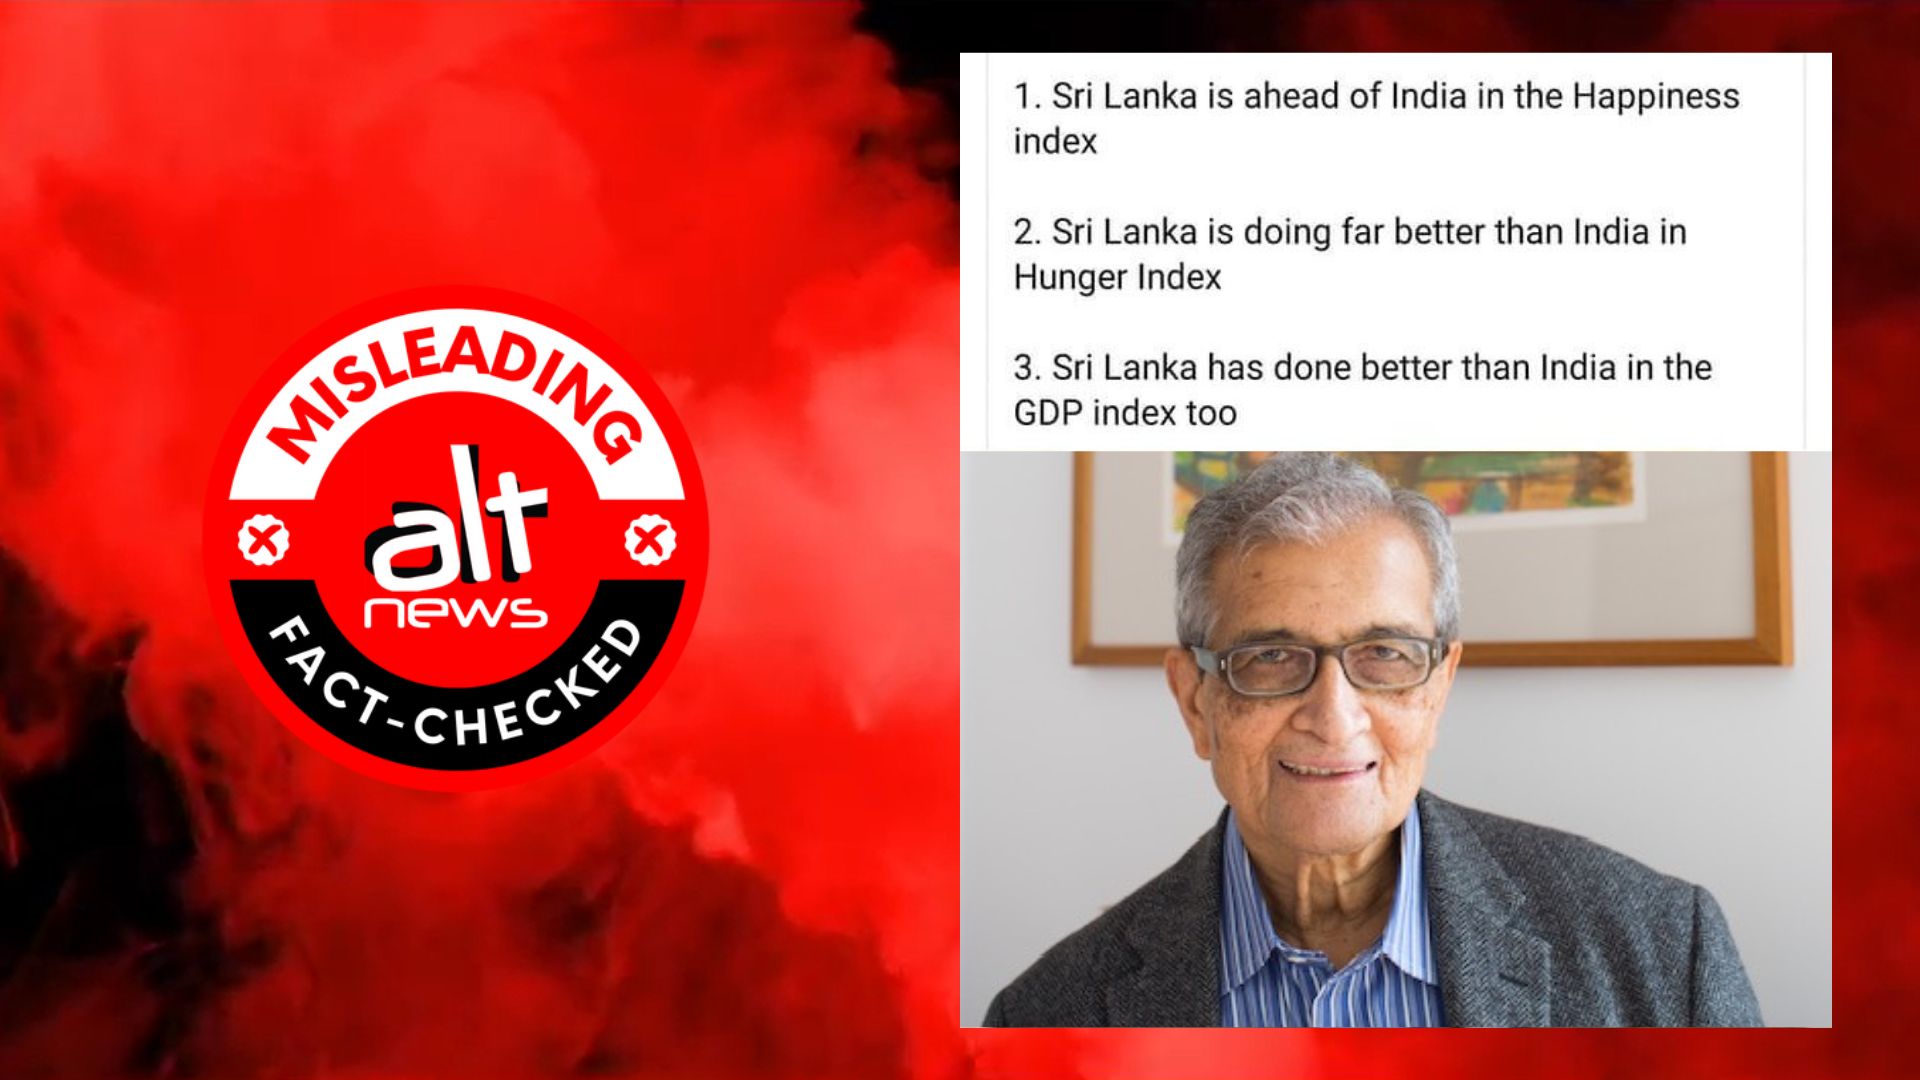 Fact-Check: Did Amartya Sen claim that Sri Lanka is ahead of India in terms of global indices? - Alt News